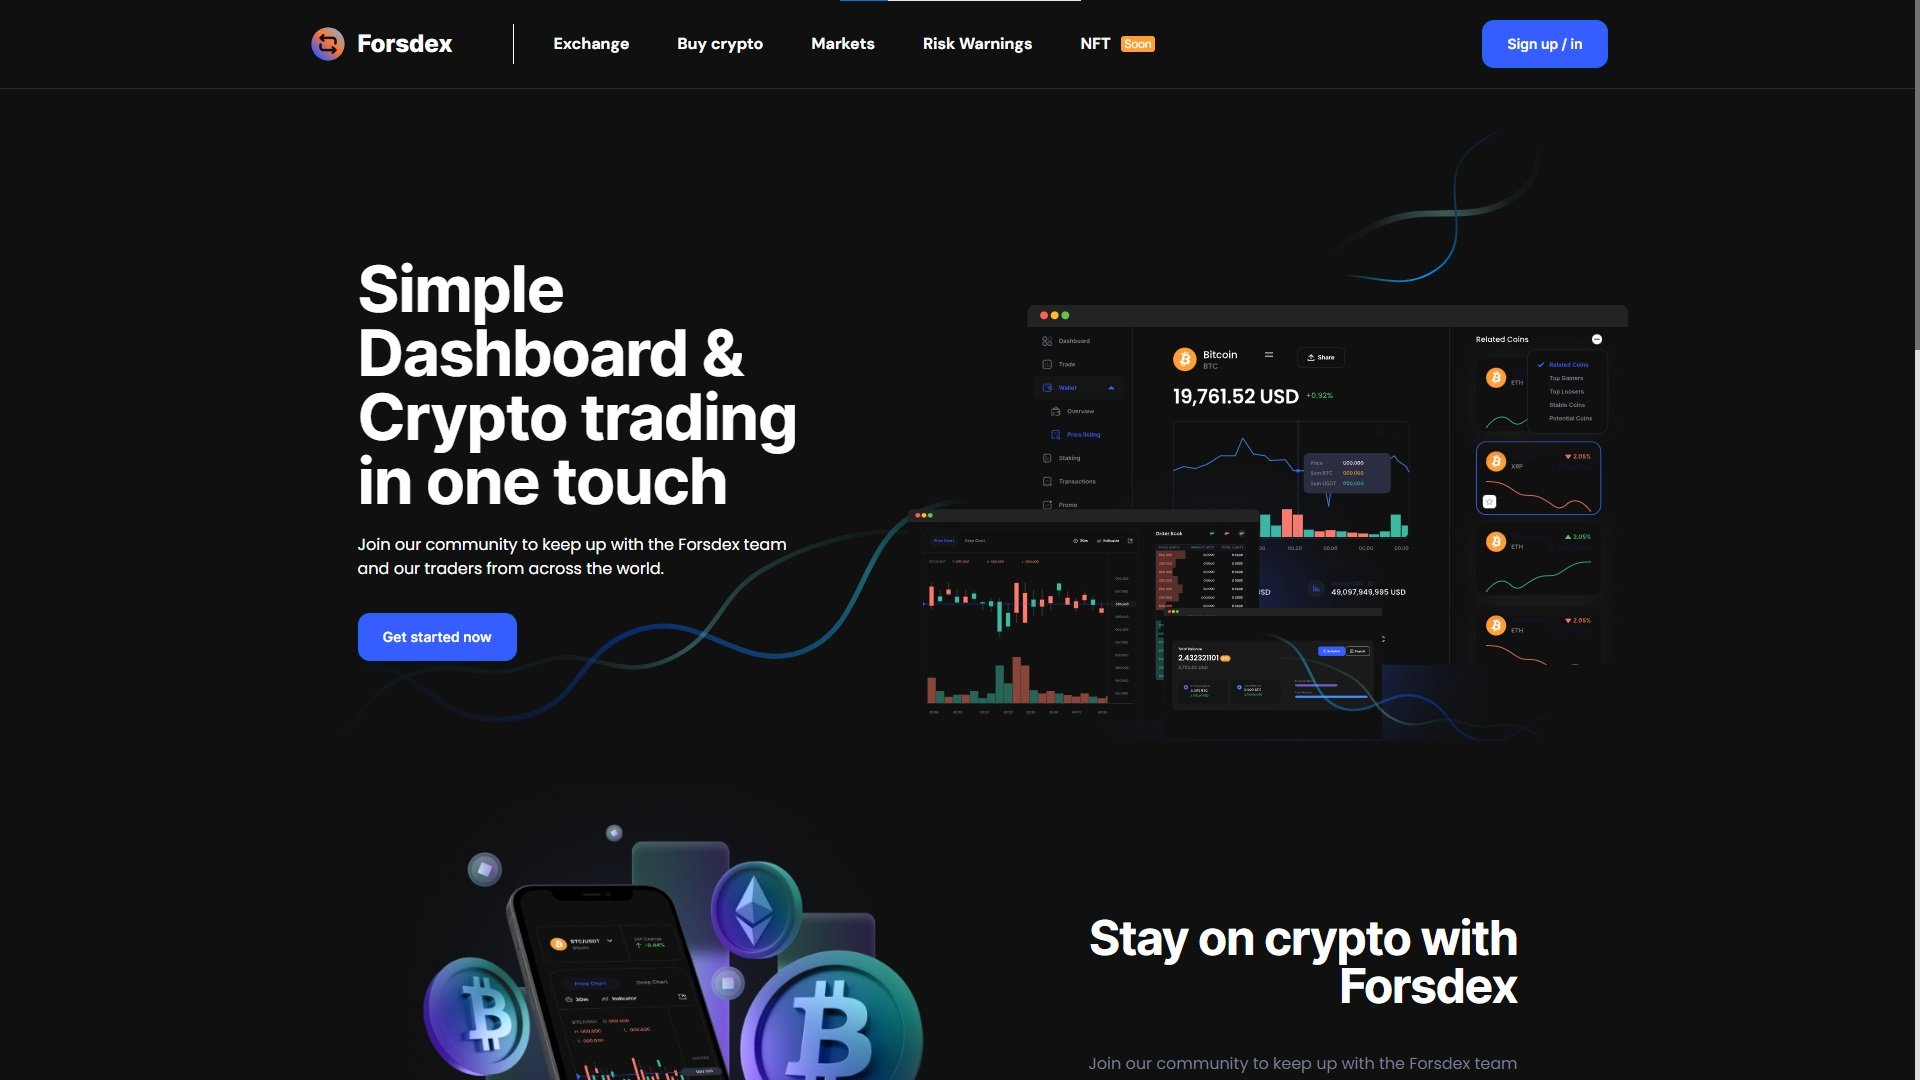 Is Forsdex a Scam Cryptocurrency Trading Platform?